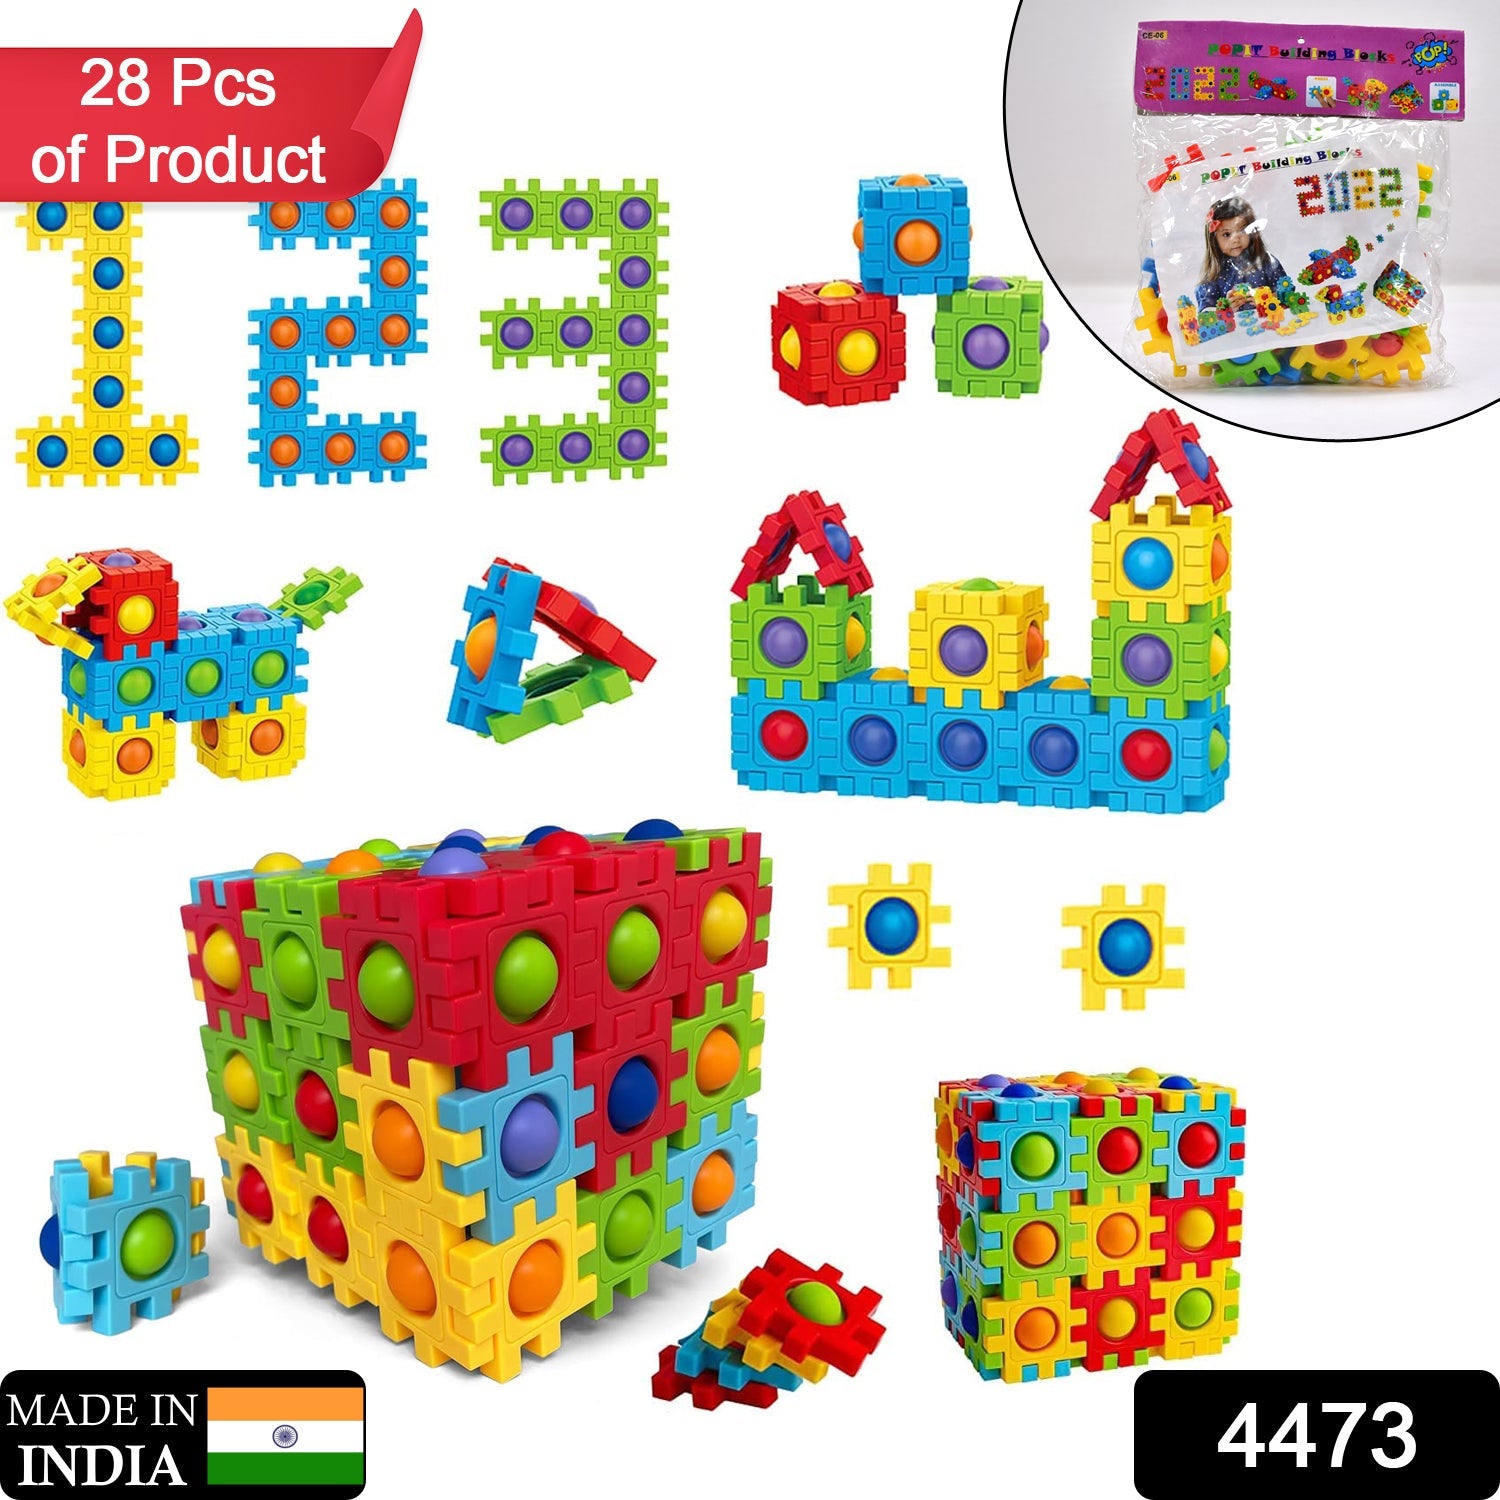 4473 Popit Building Blocks Toy For Kids & Adult Use ( 28 pcs Product ) 